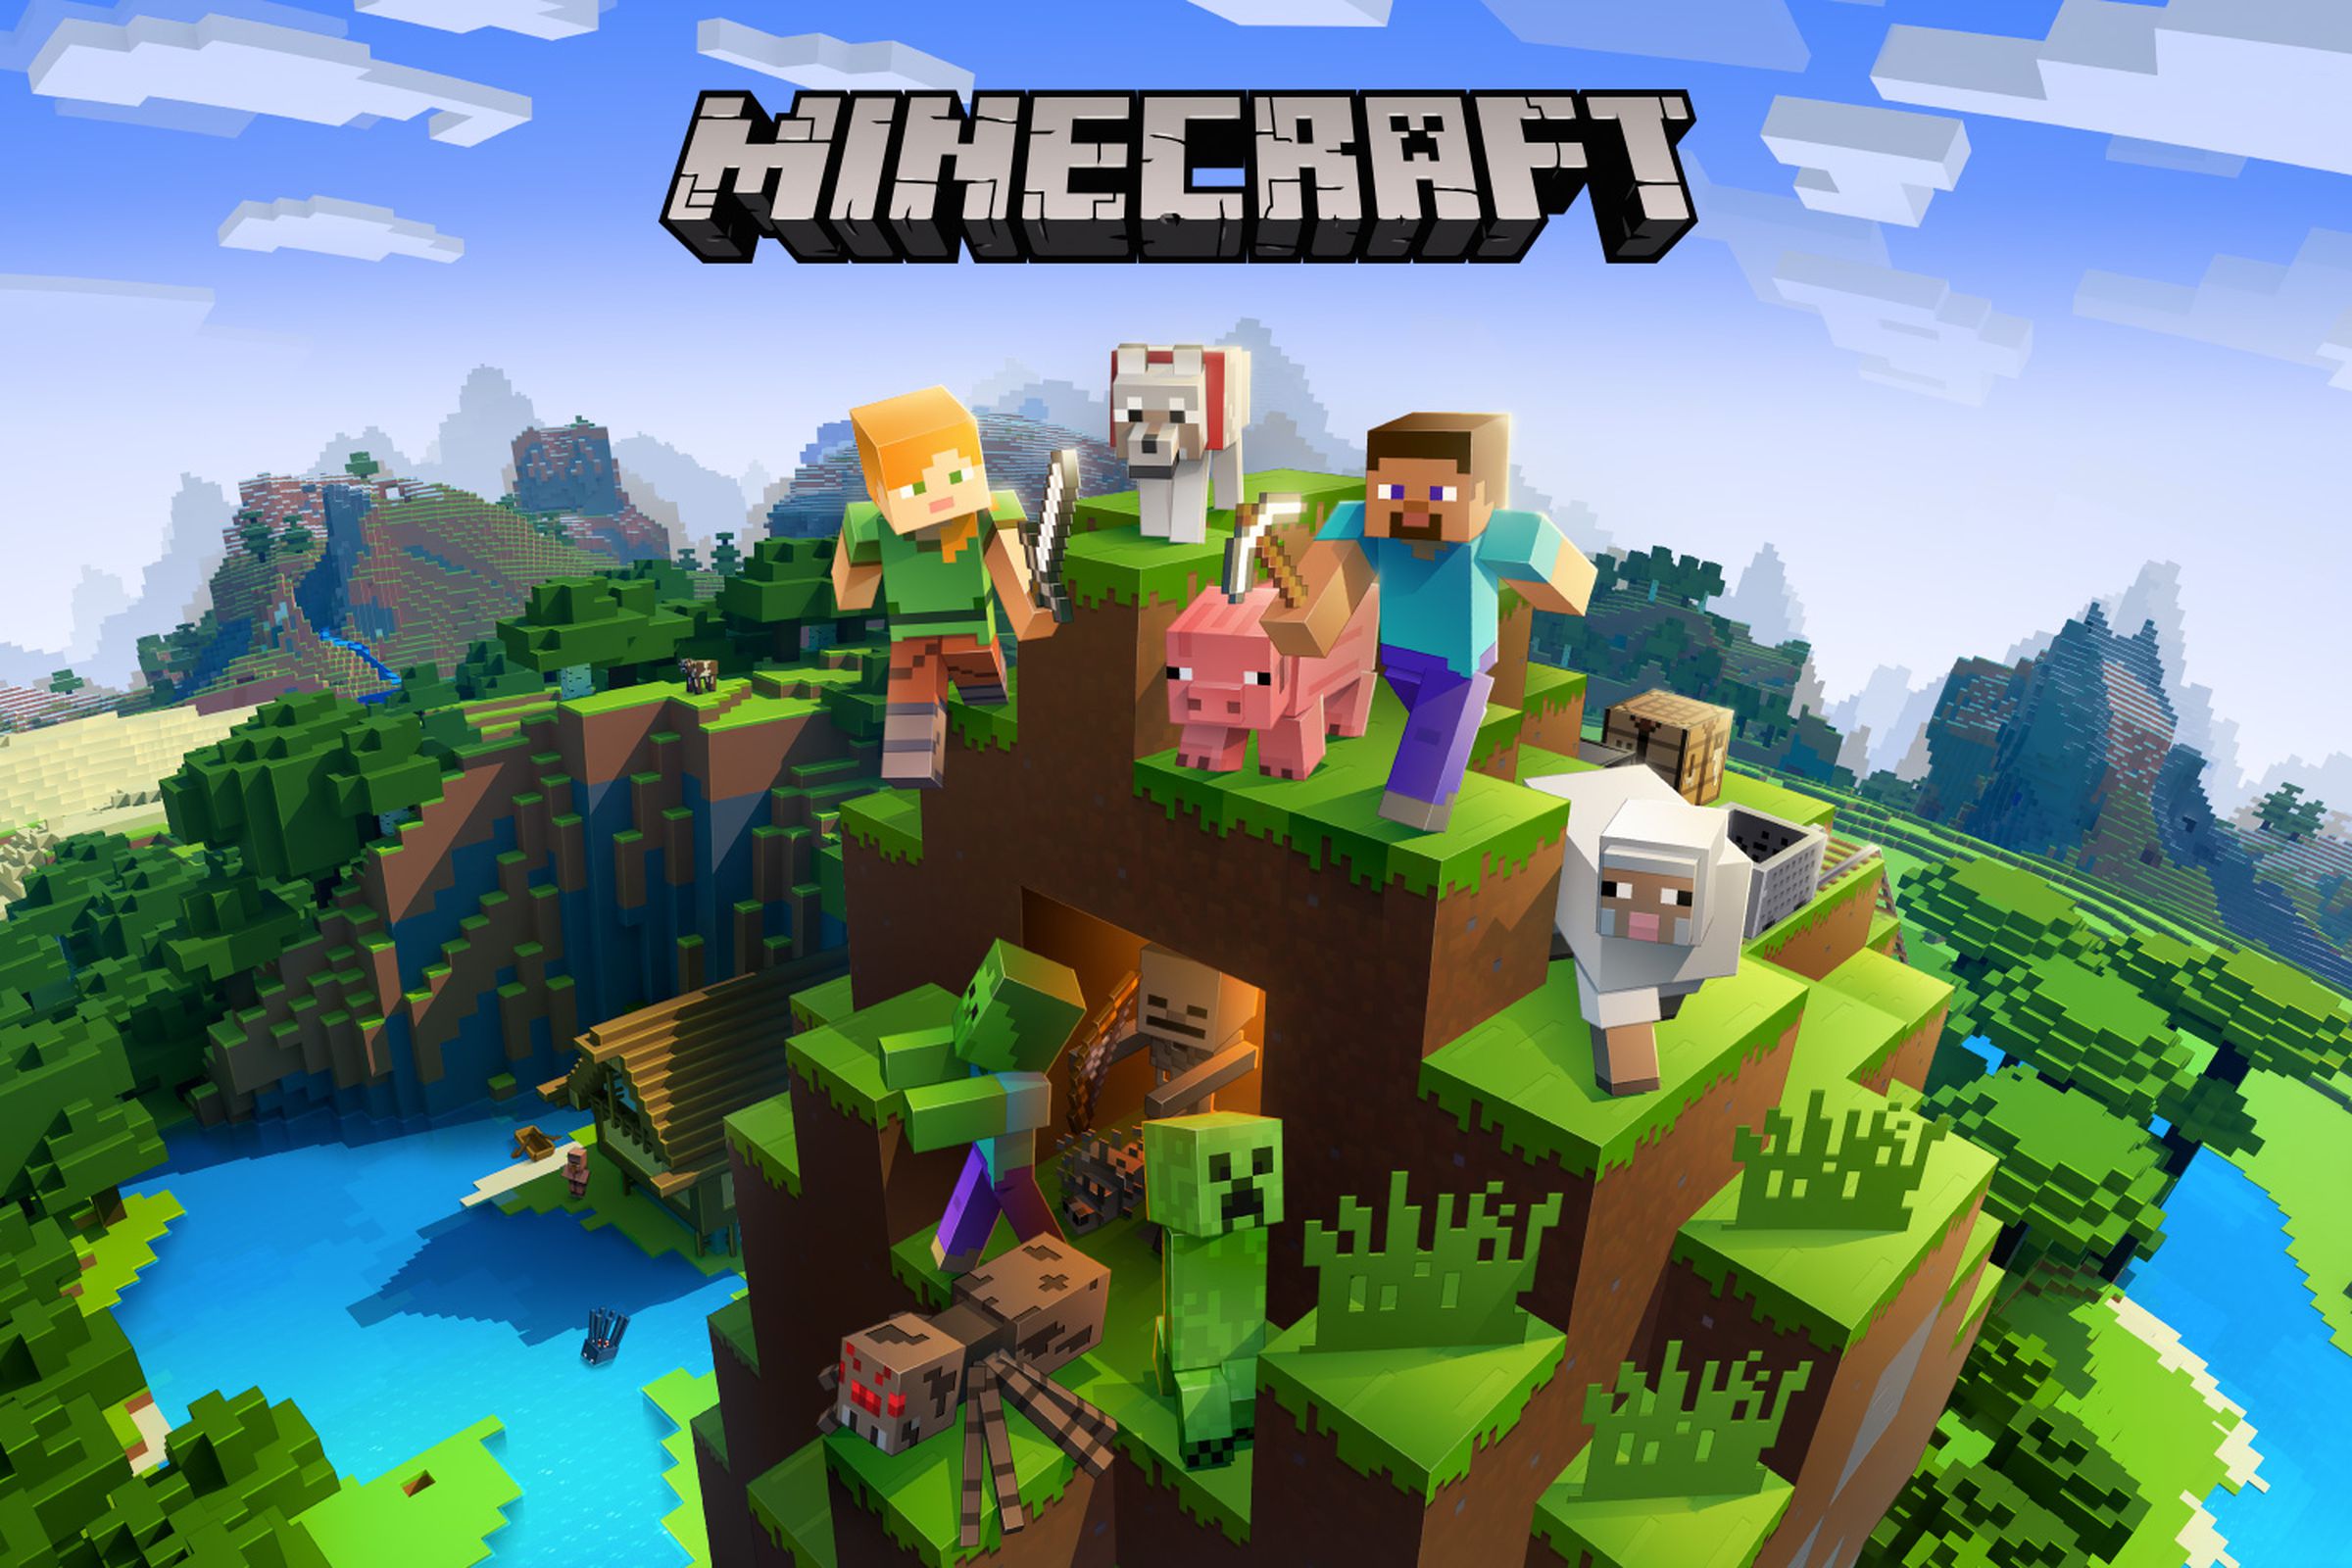 An illustration of Minecraft characters